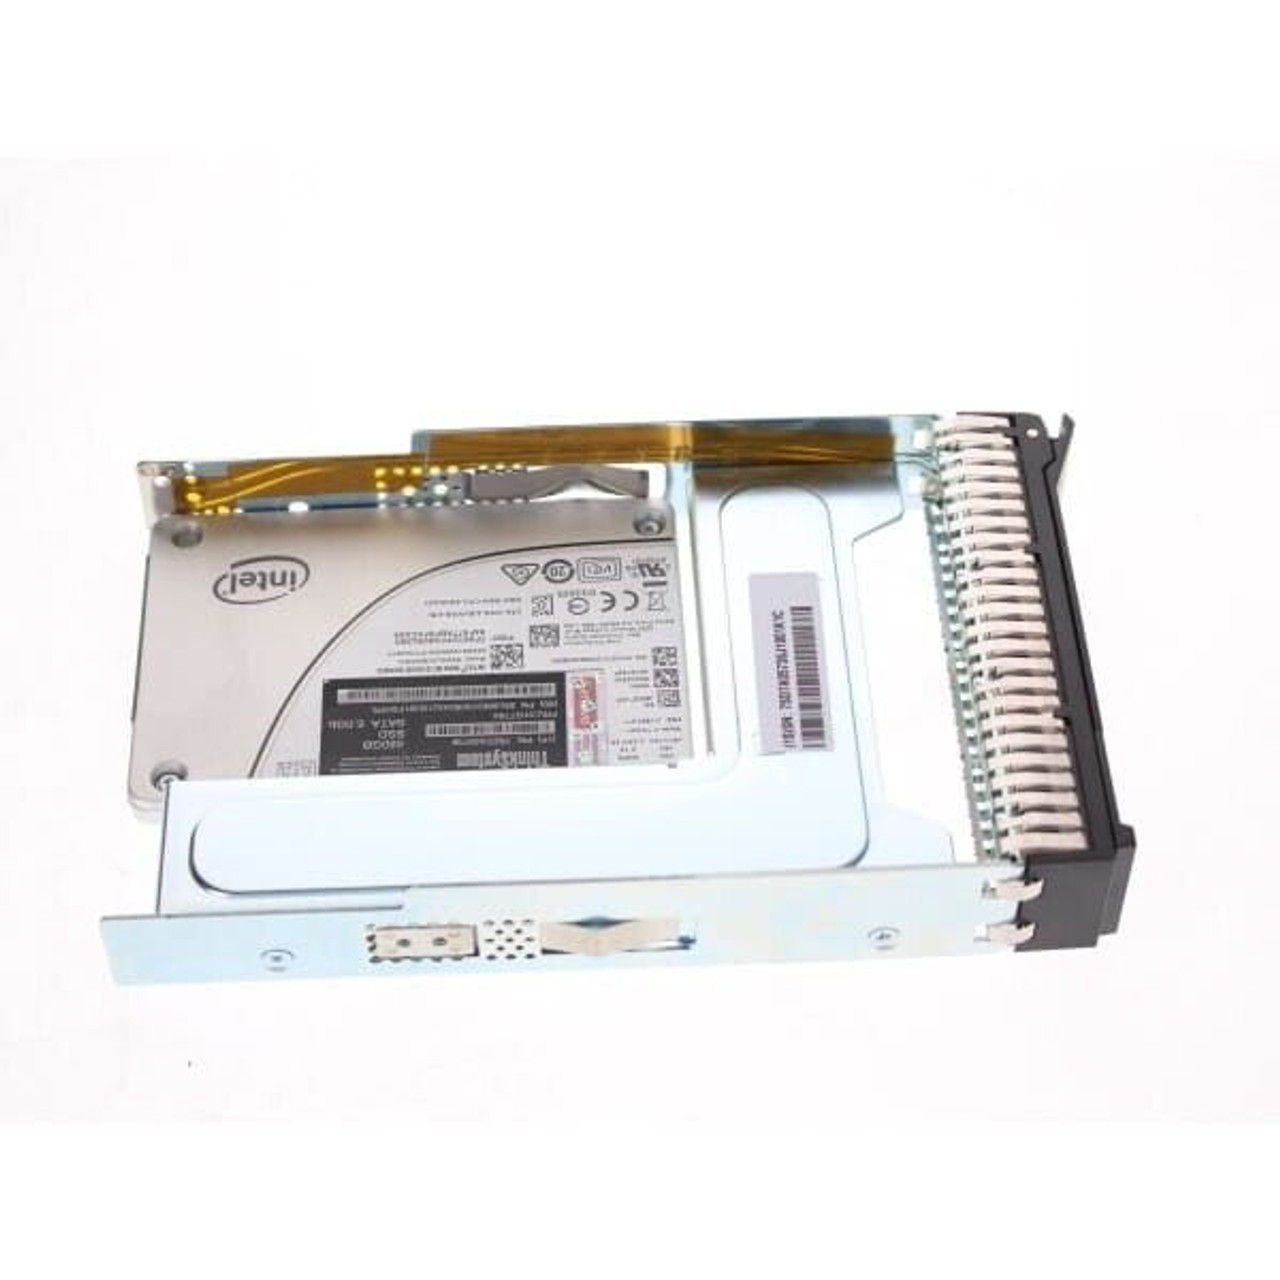 Lenovo 01GT764 480GB 6G S4500 SATA 2.5" Solid State Drive in 3.5" tray zxy